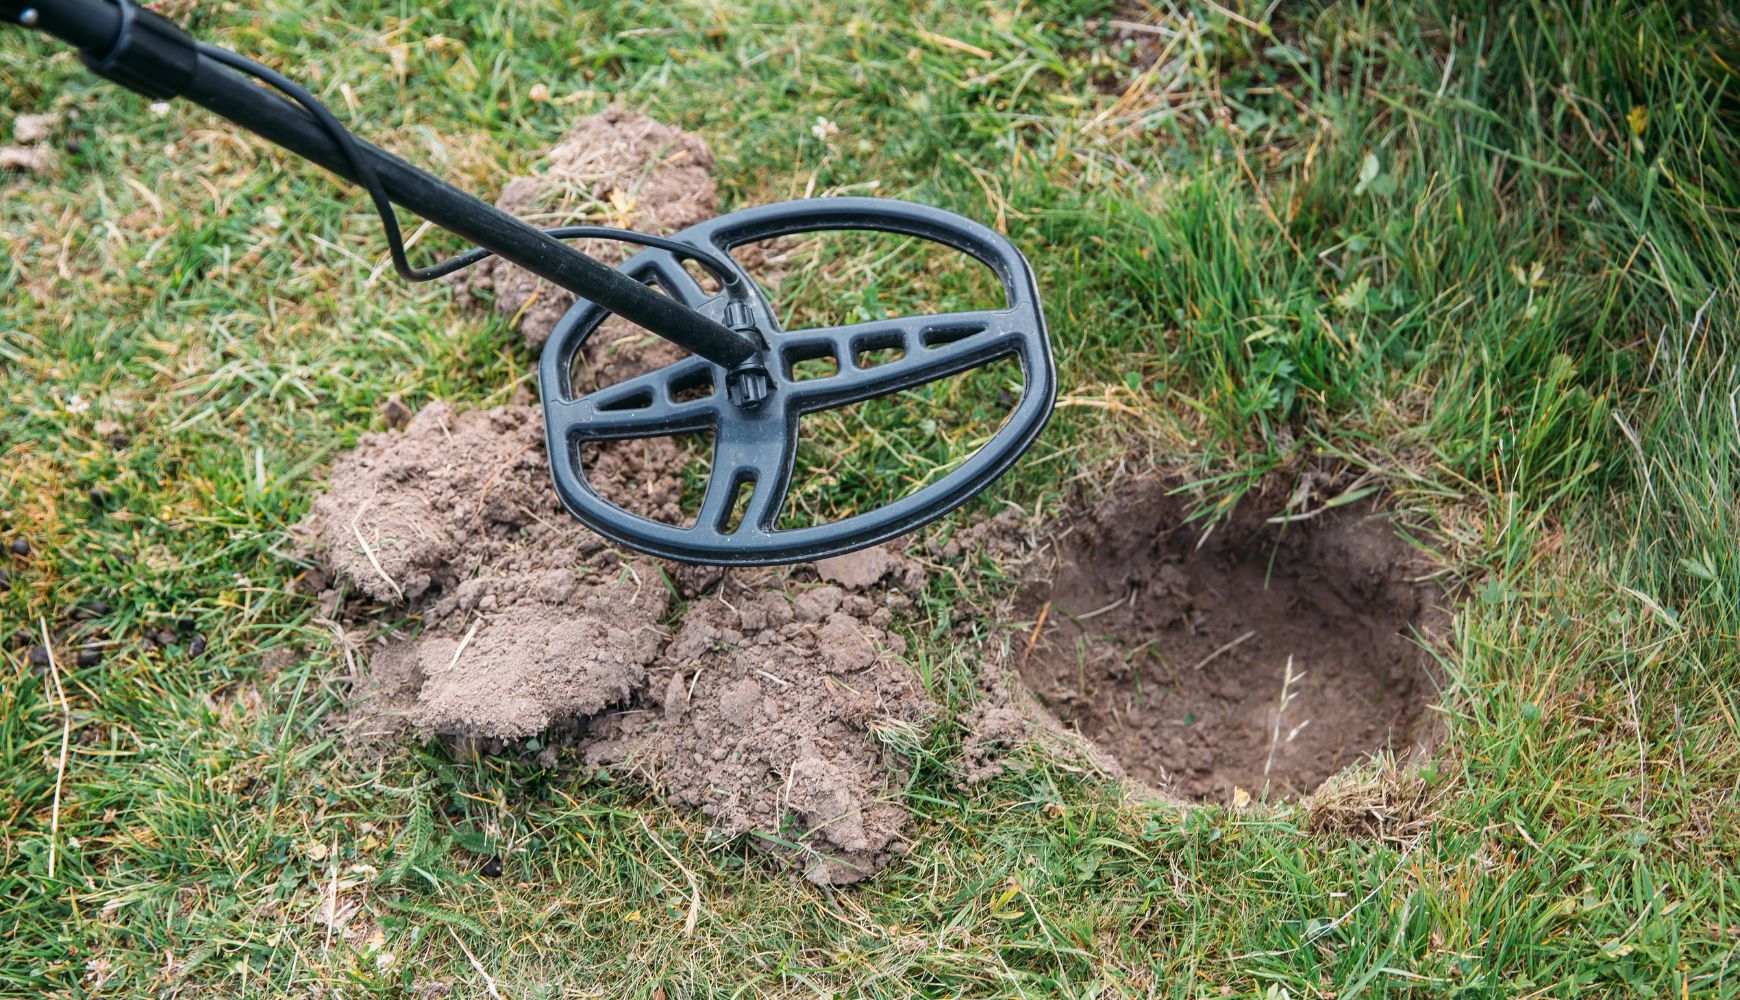 Maintenance Tips To Extend the Life of Your Metal Detector